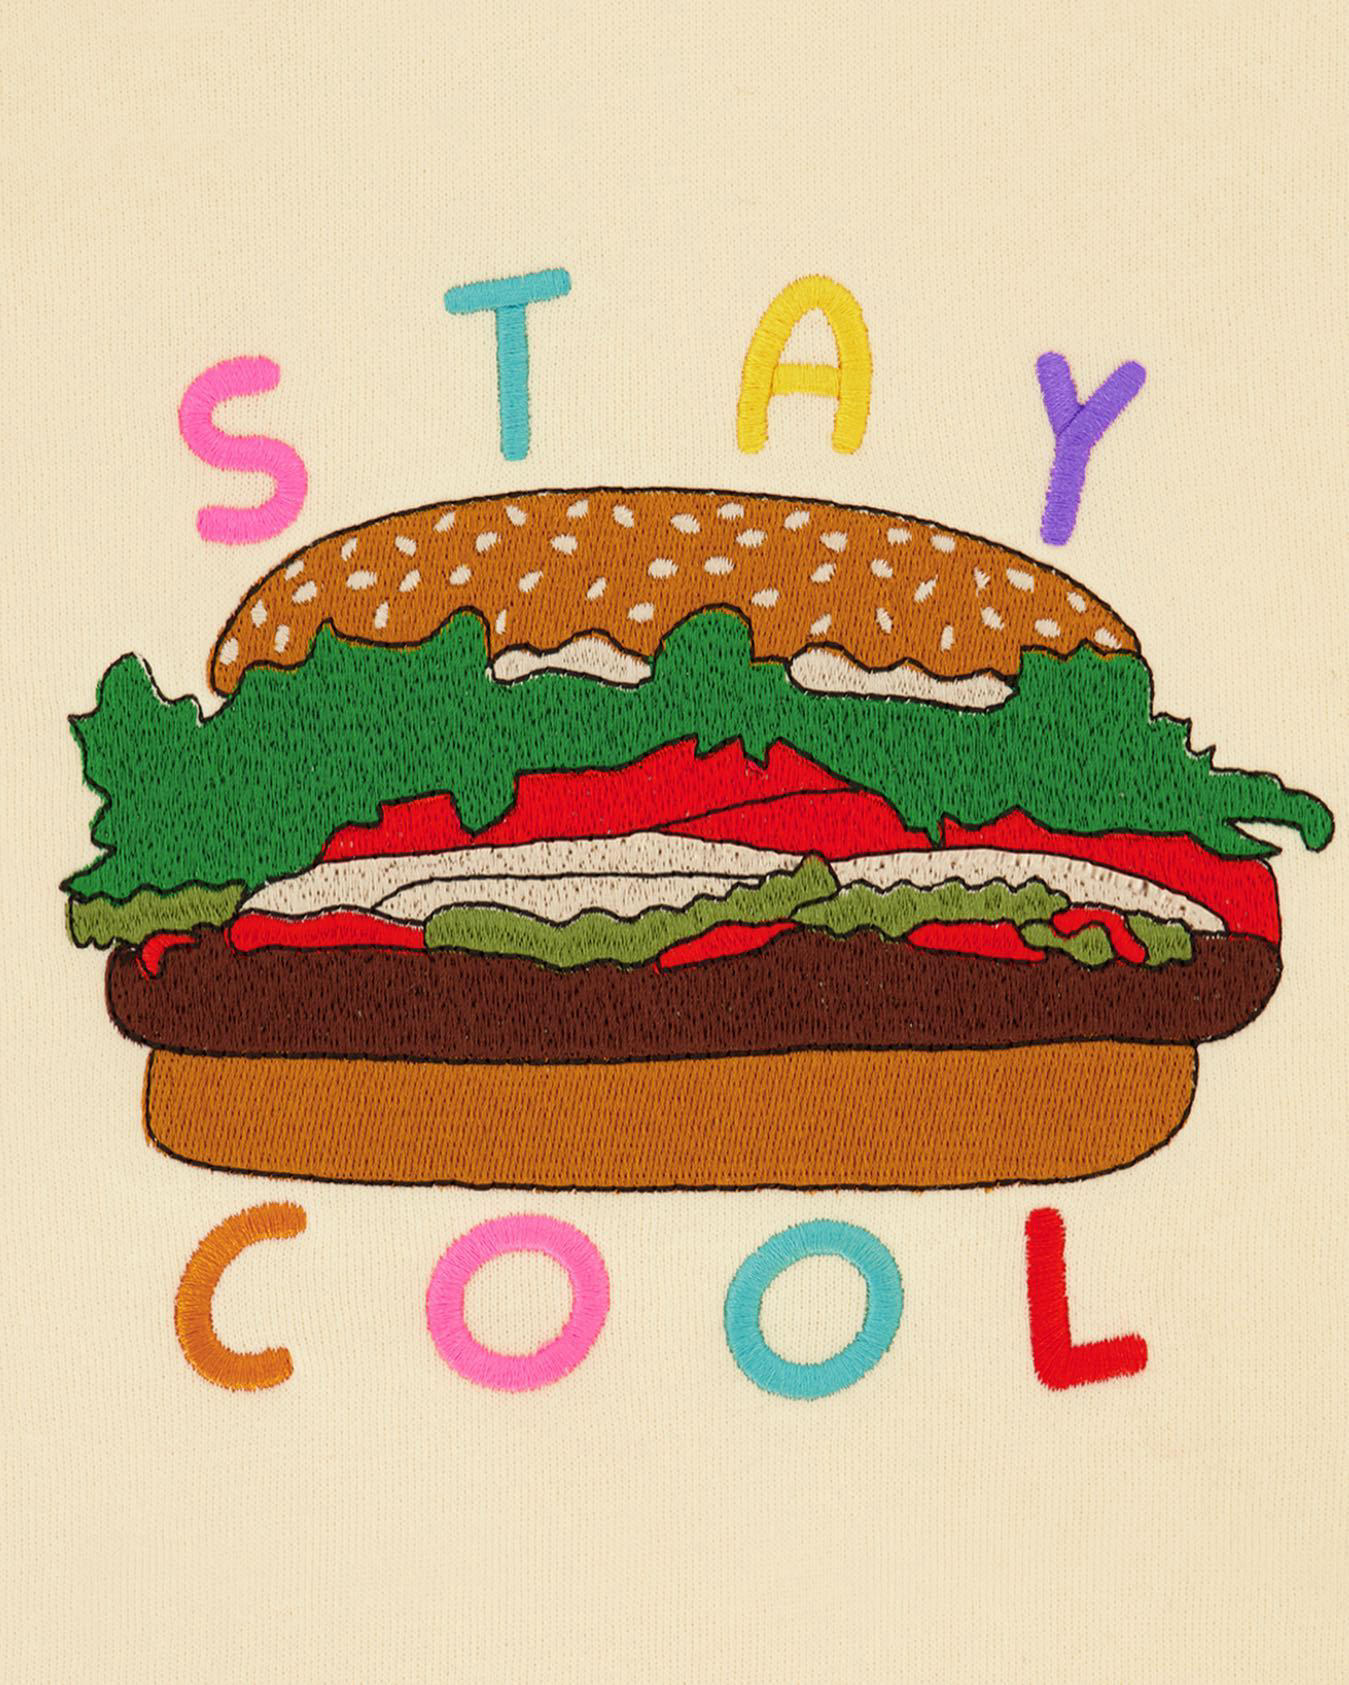 Burger King - sometimes to stay warm, you gotta stay cool